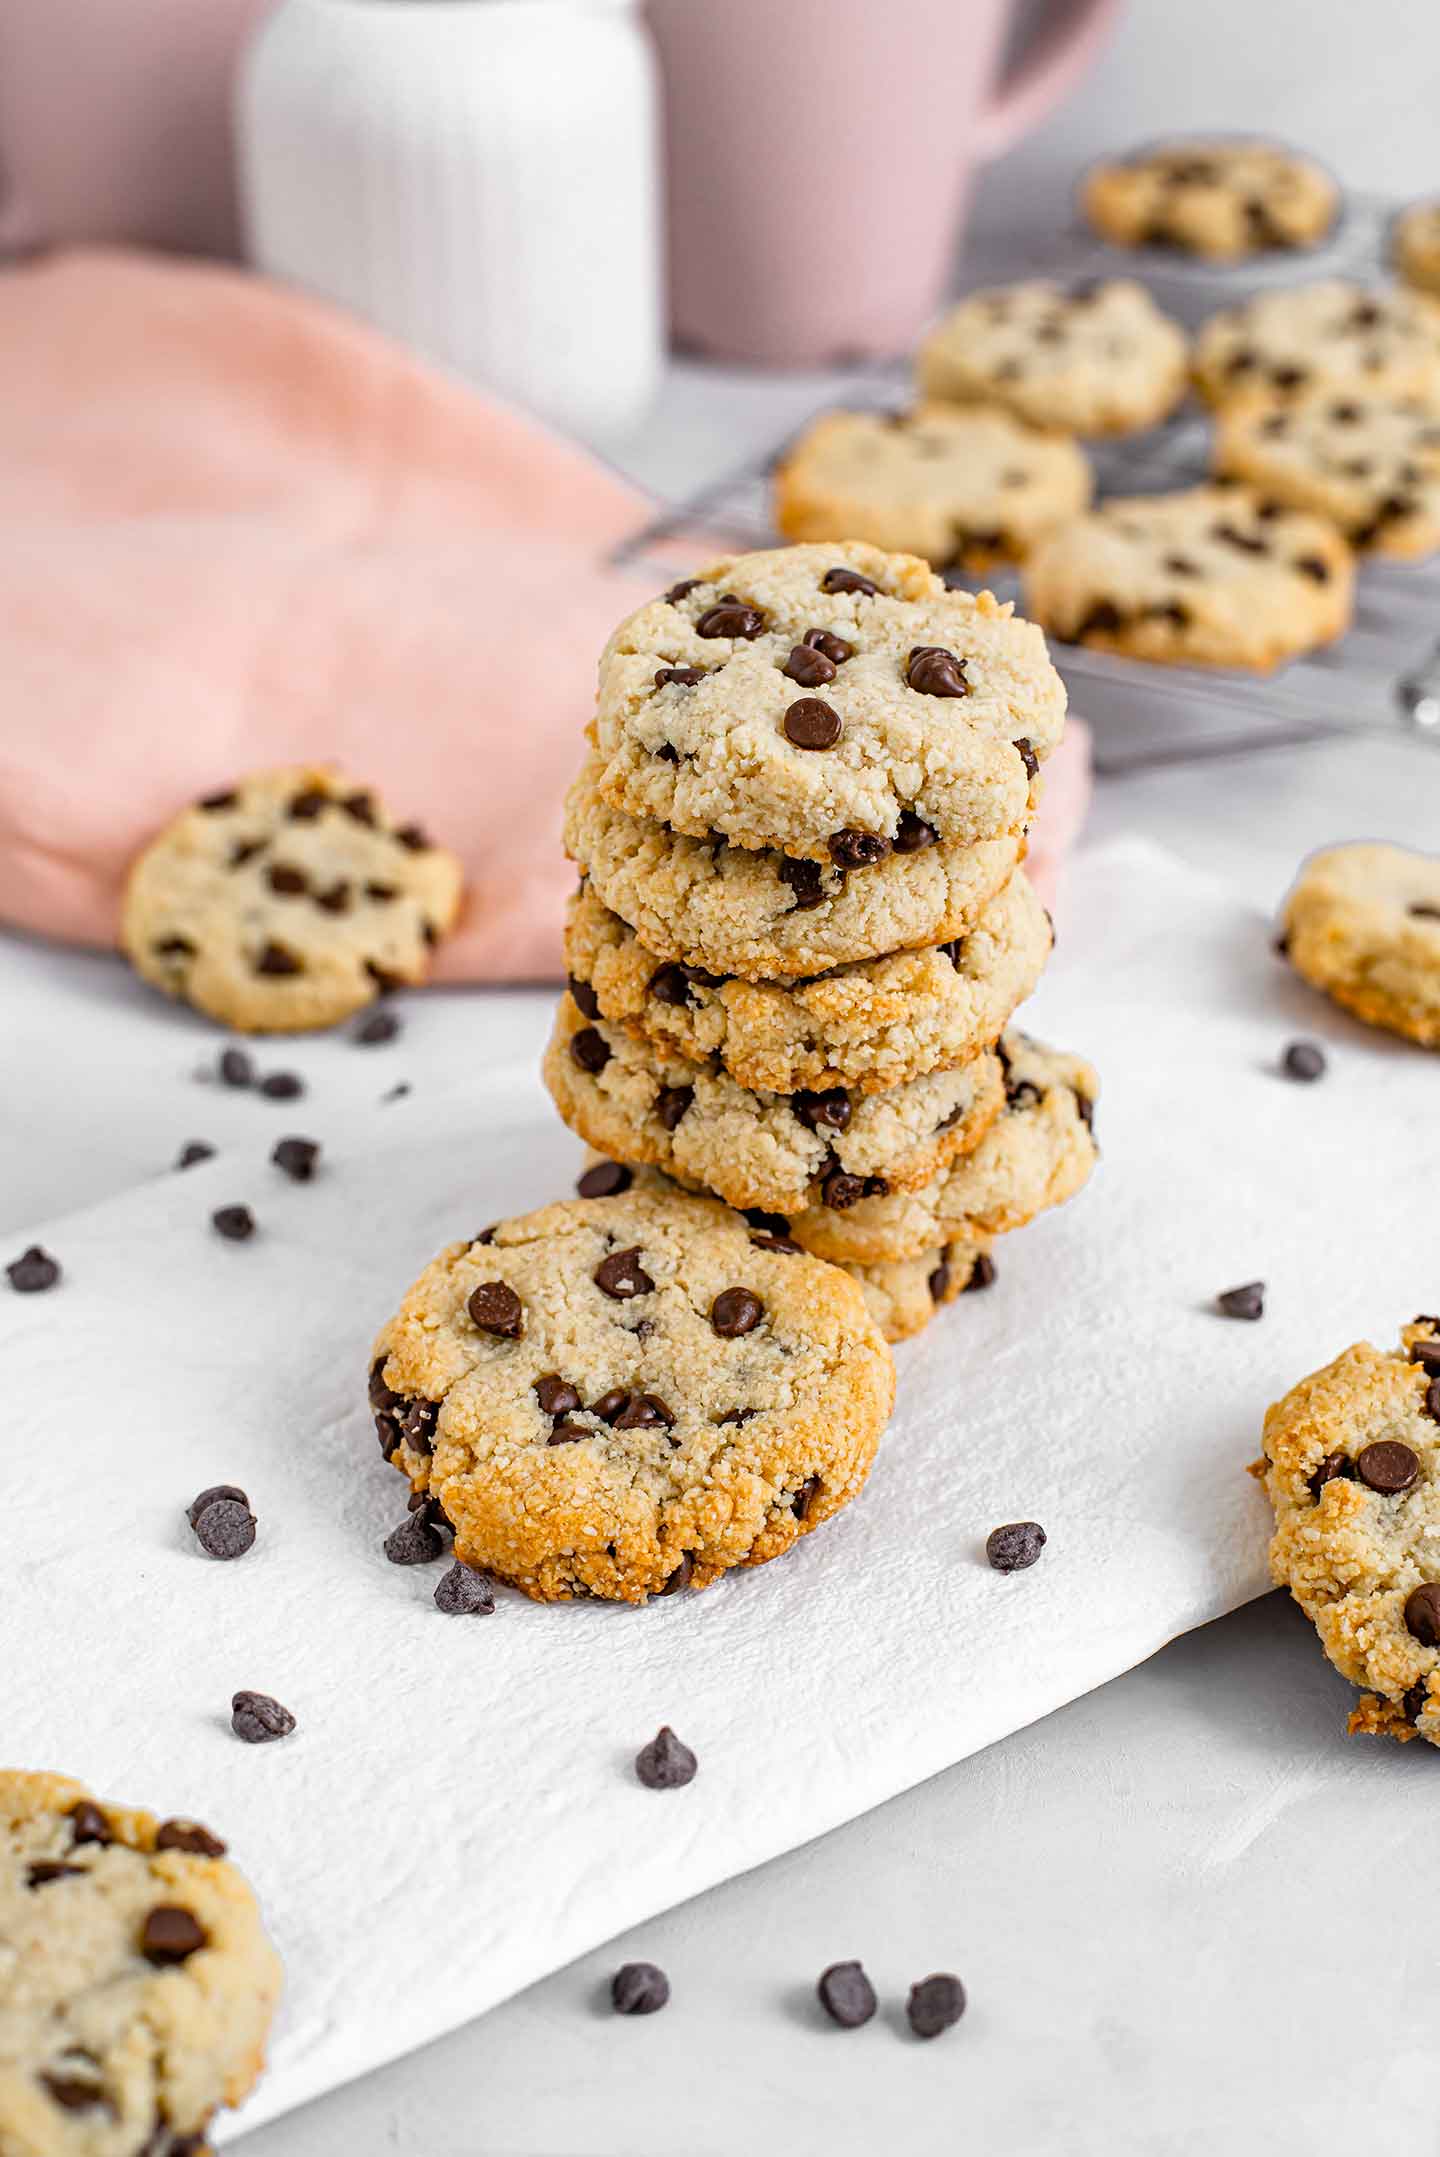 A tower of golden chocolate chip cookies on a white tray with chocolate chips and other cookies scattered around.